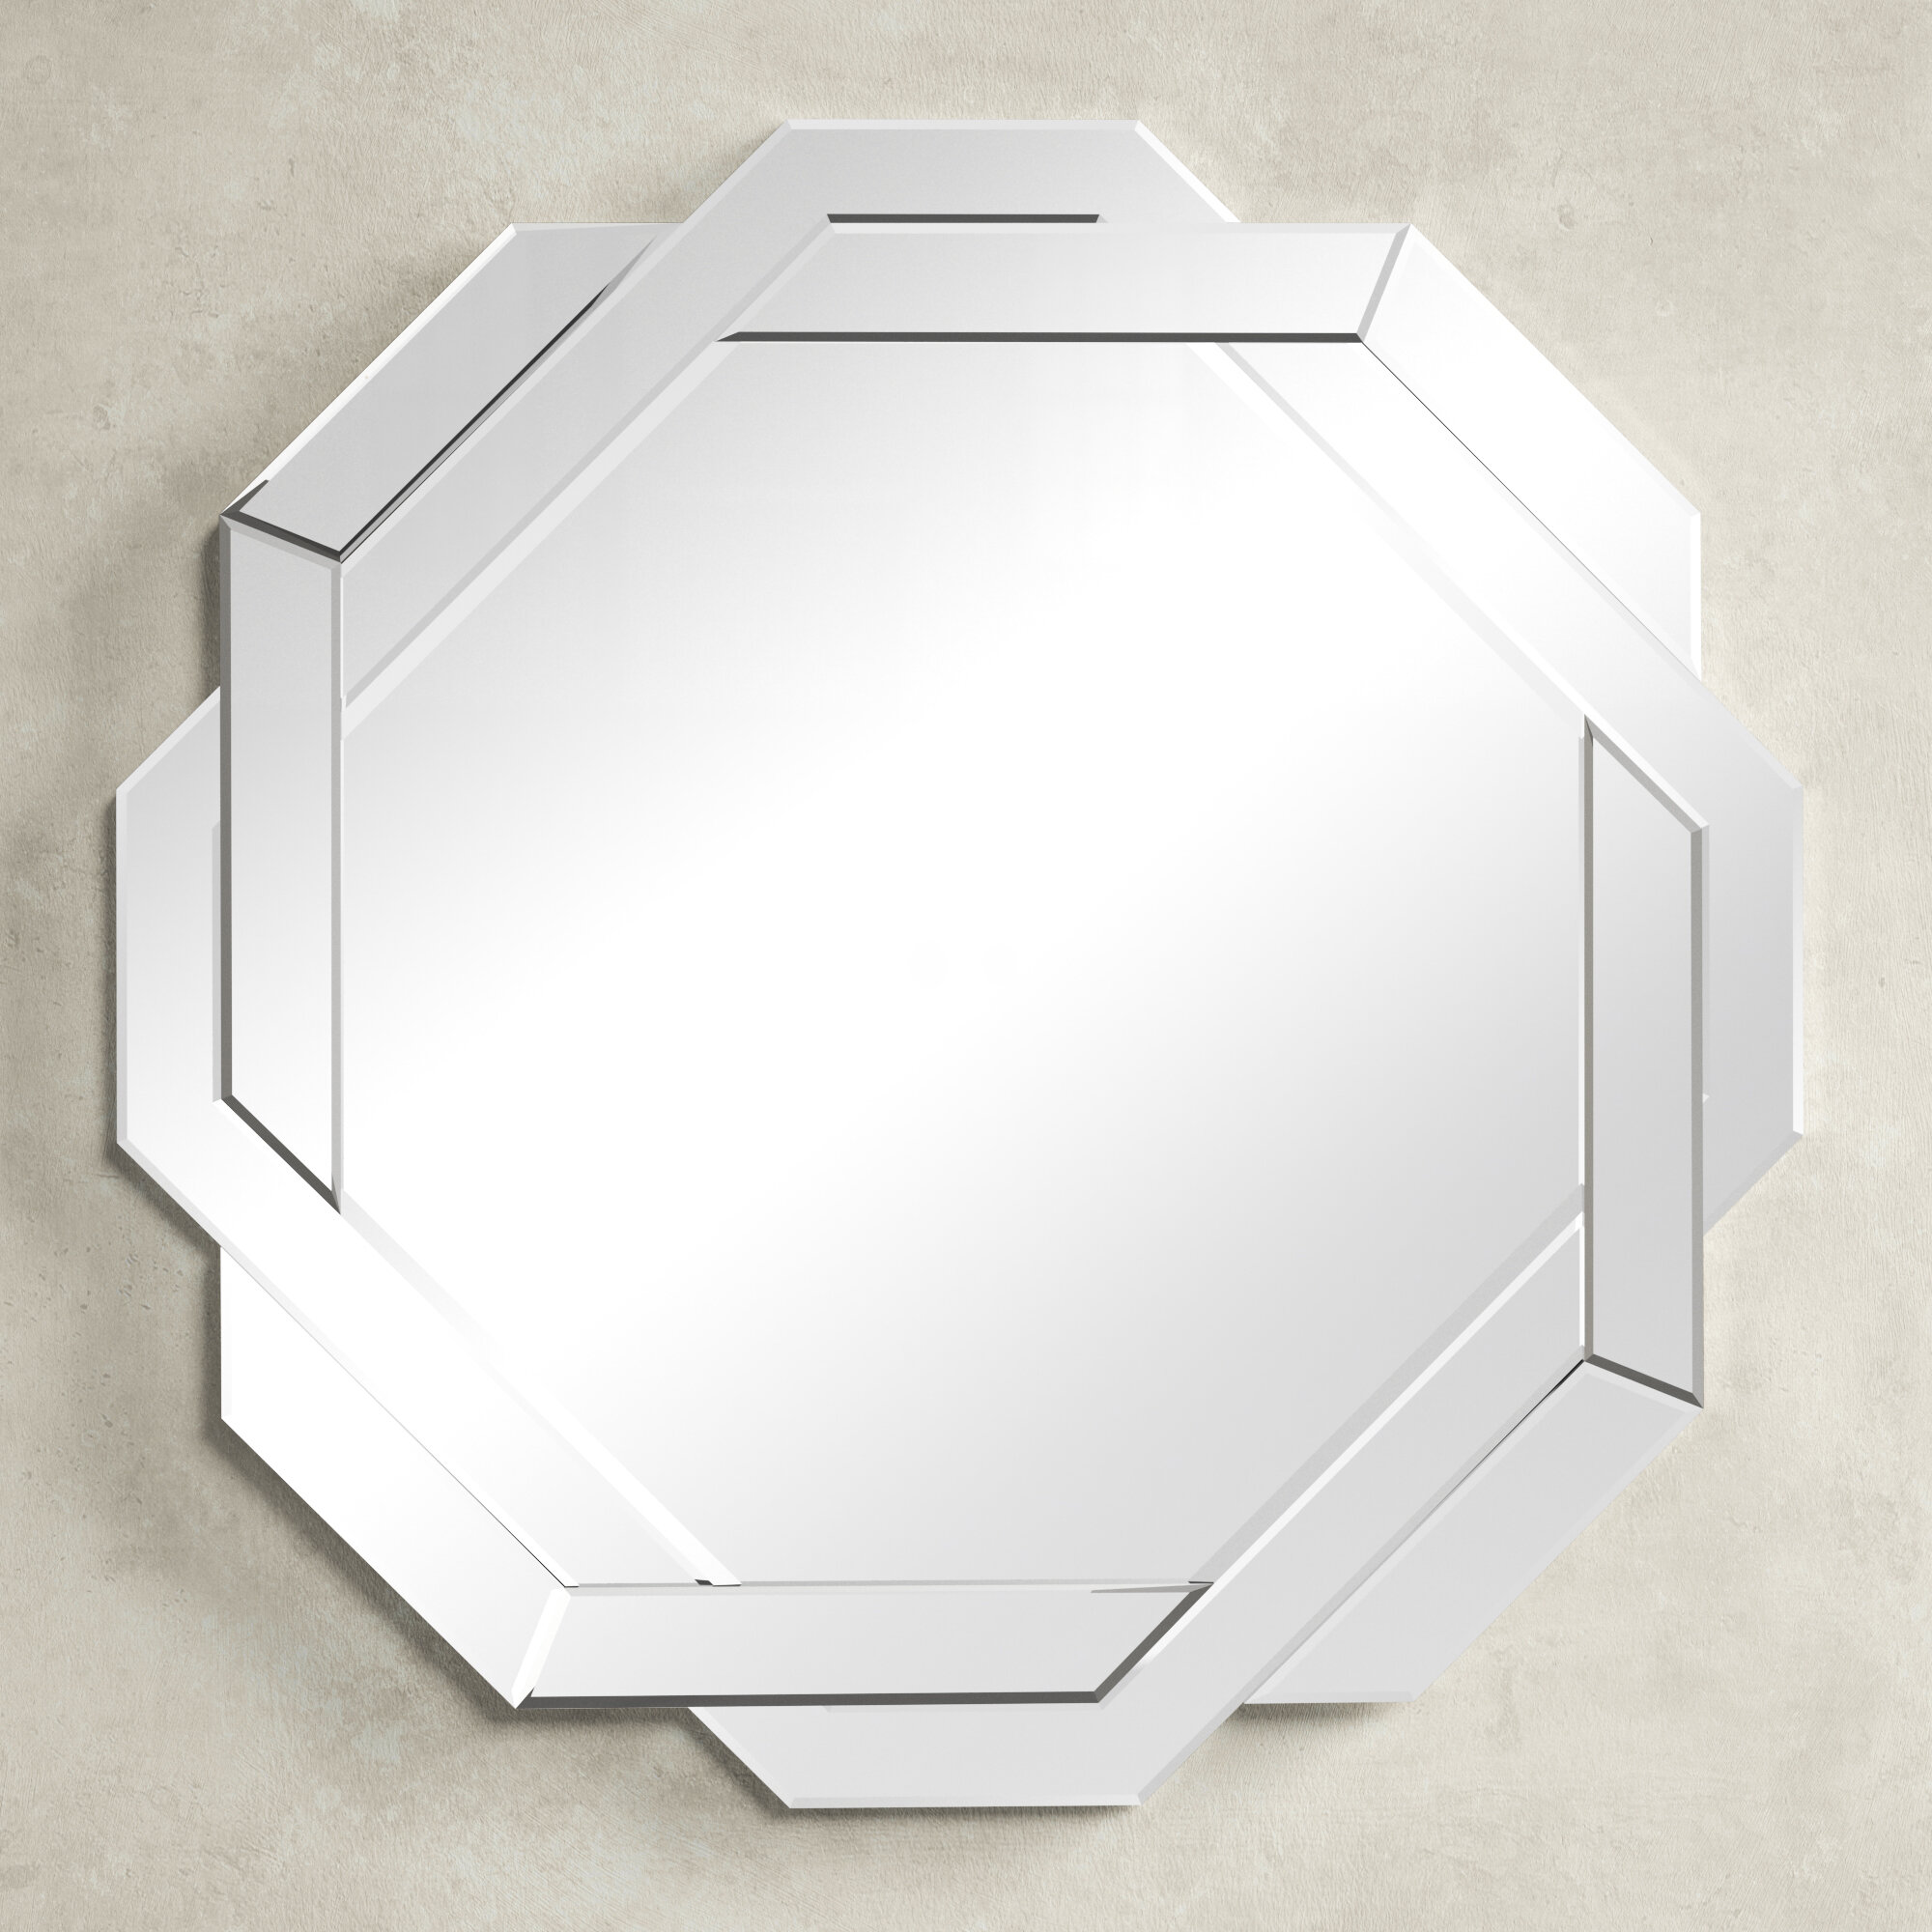 Beveled Glass Octagonal  Mirrored Coasters Set of 3 NEW 